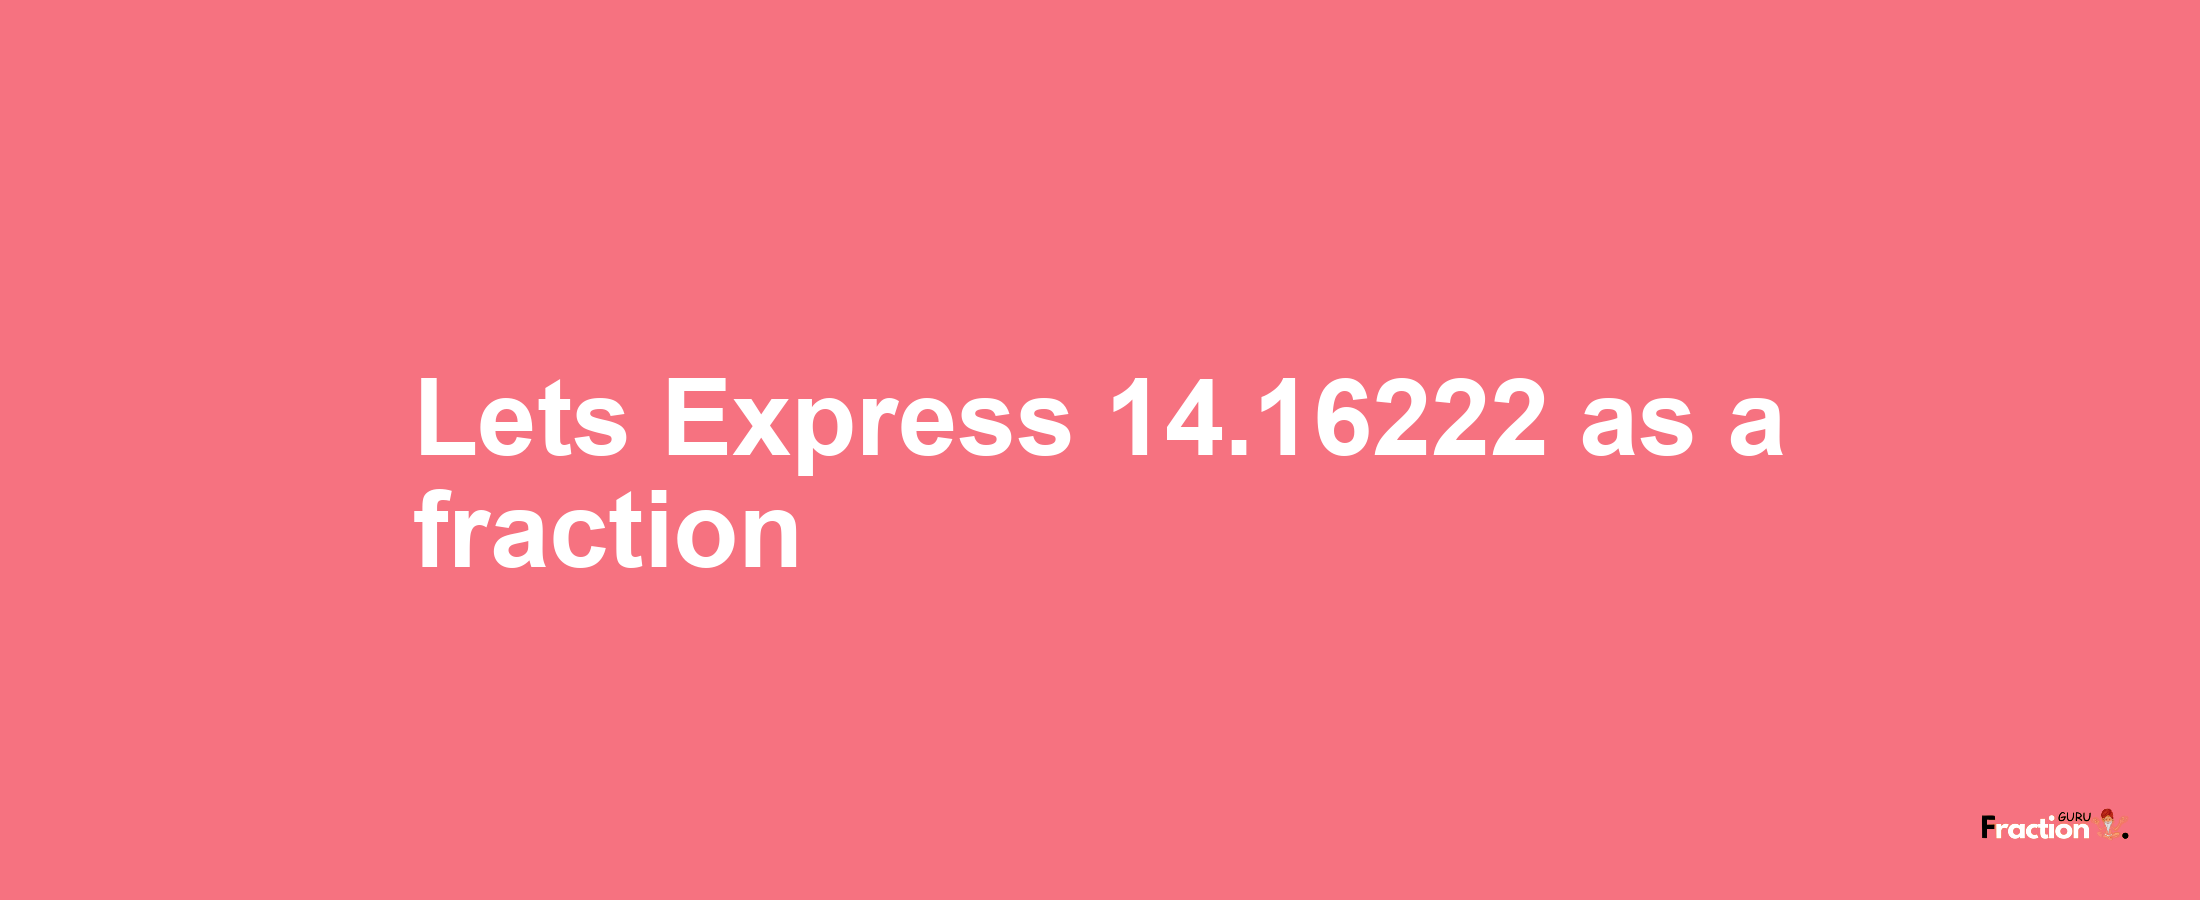 Lets Express 14.16222 as afraction